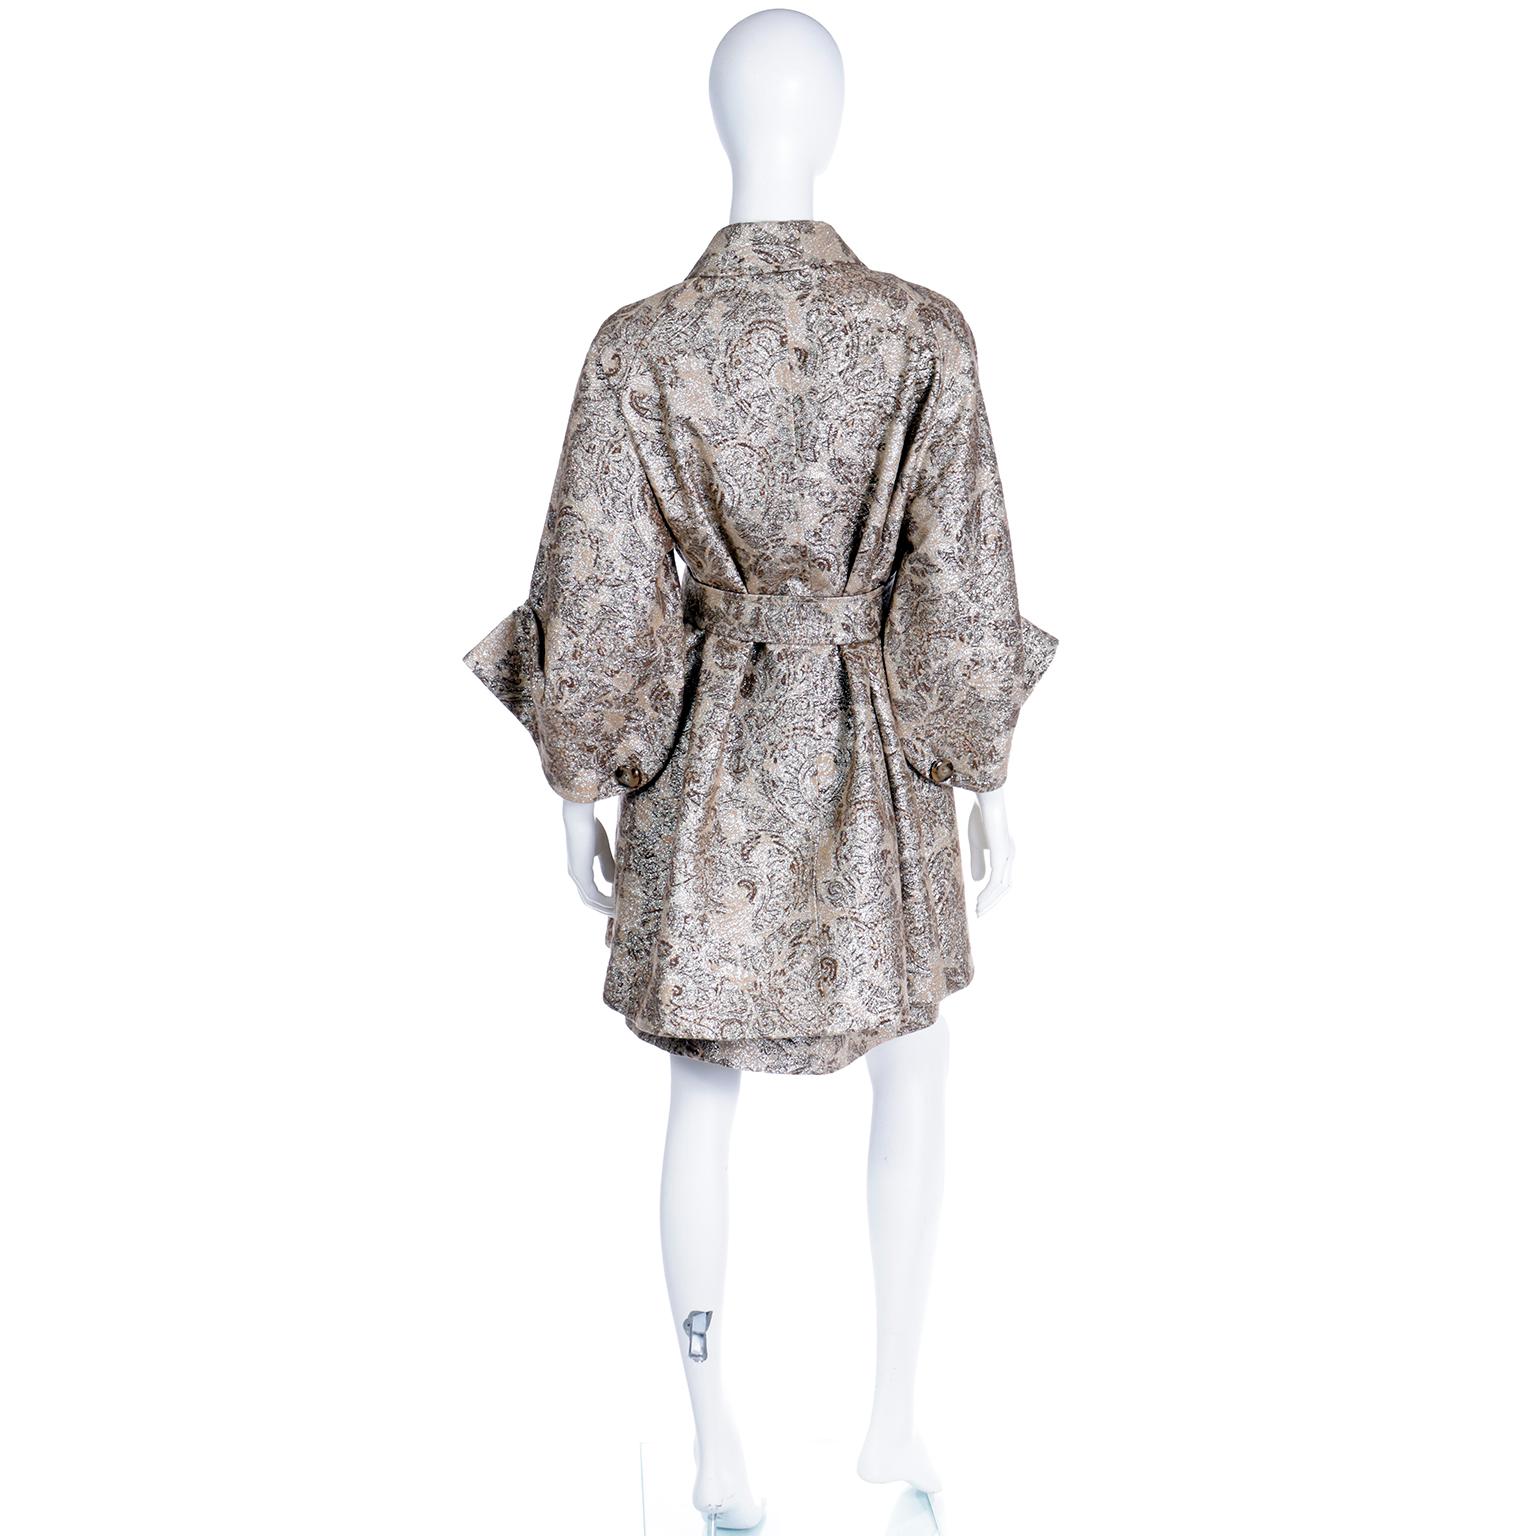 D&G Dolce & Gabbana Gold Floral Dress and Coat With Belt Amy Winehouse 2007 For Sale 5